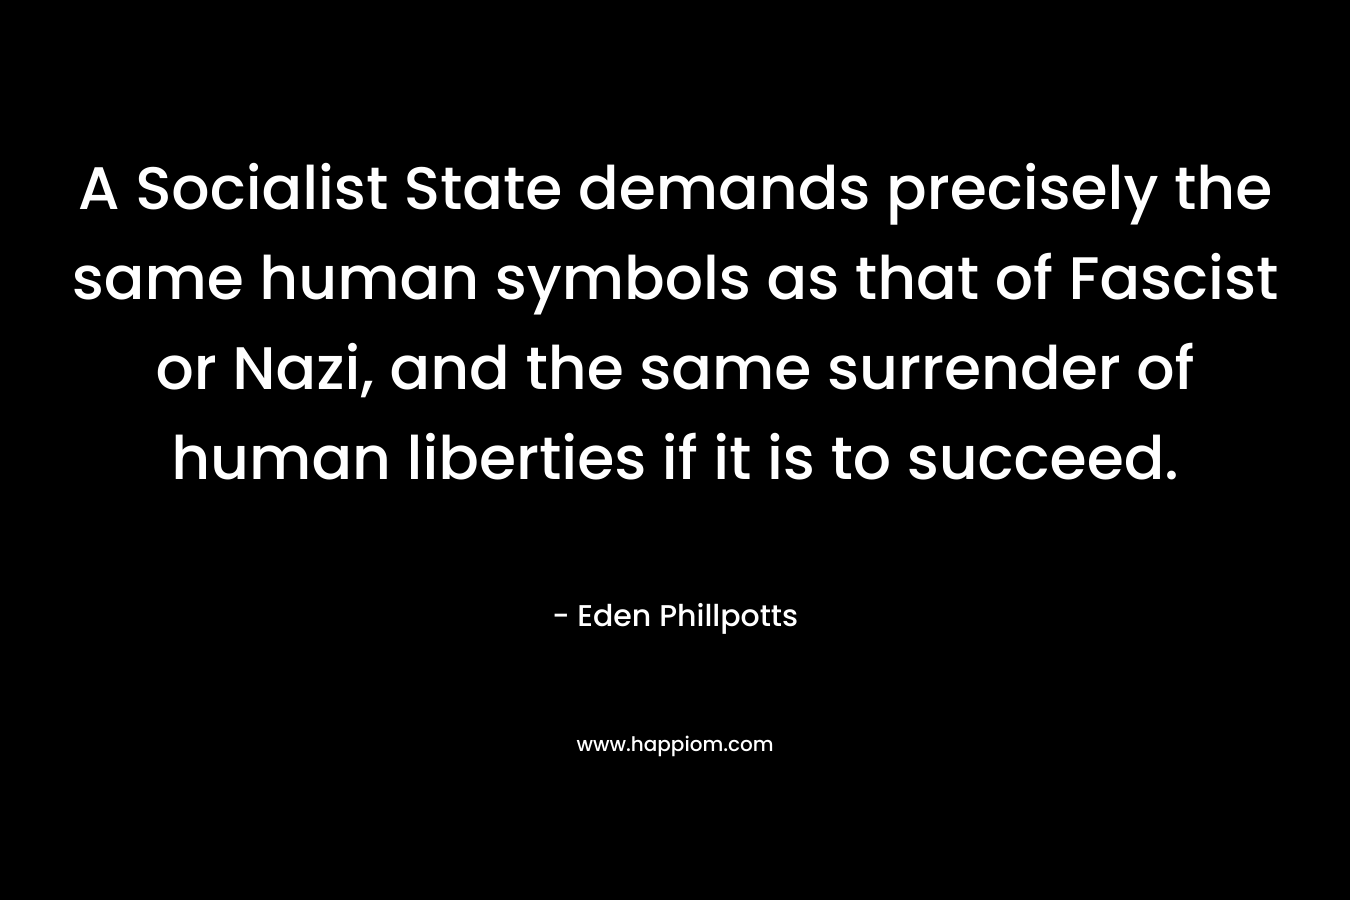 A Socialist State demands precisely the same human symbols as that of Fascist or Nazi, and the same surrender of human liberties if it is to succeed. – Eden Phillpotts